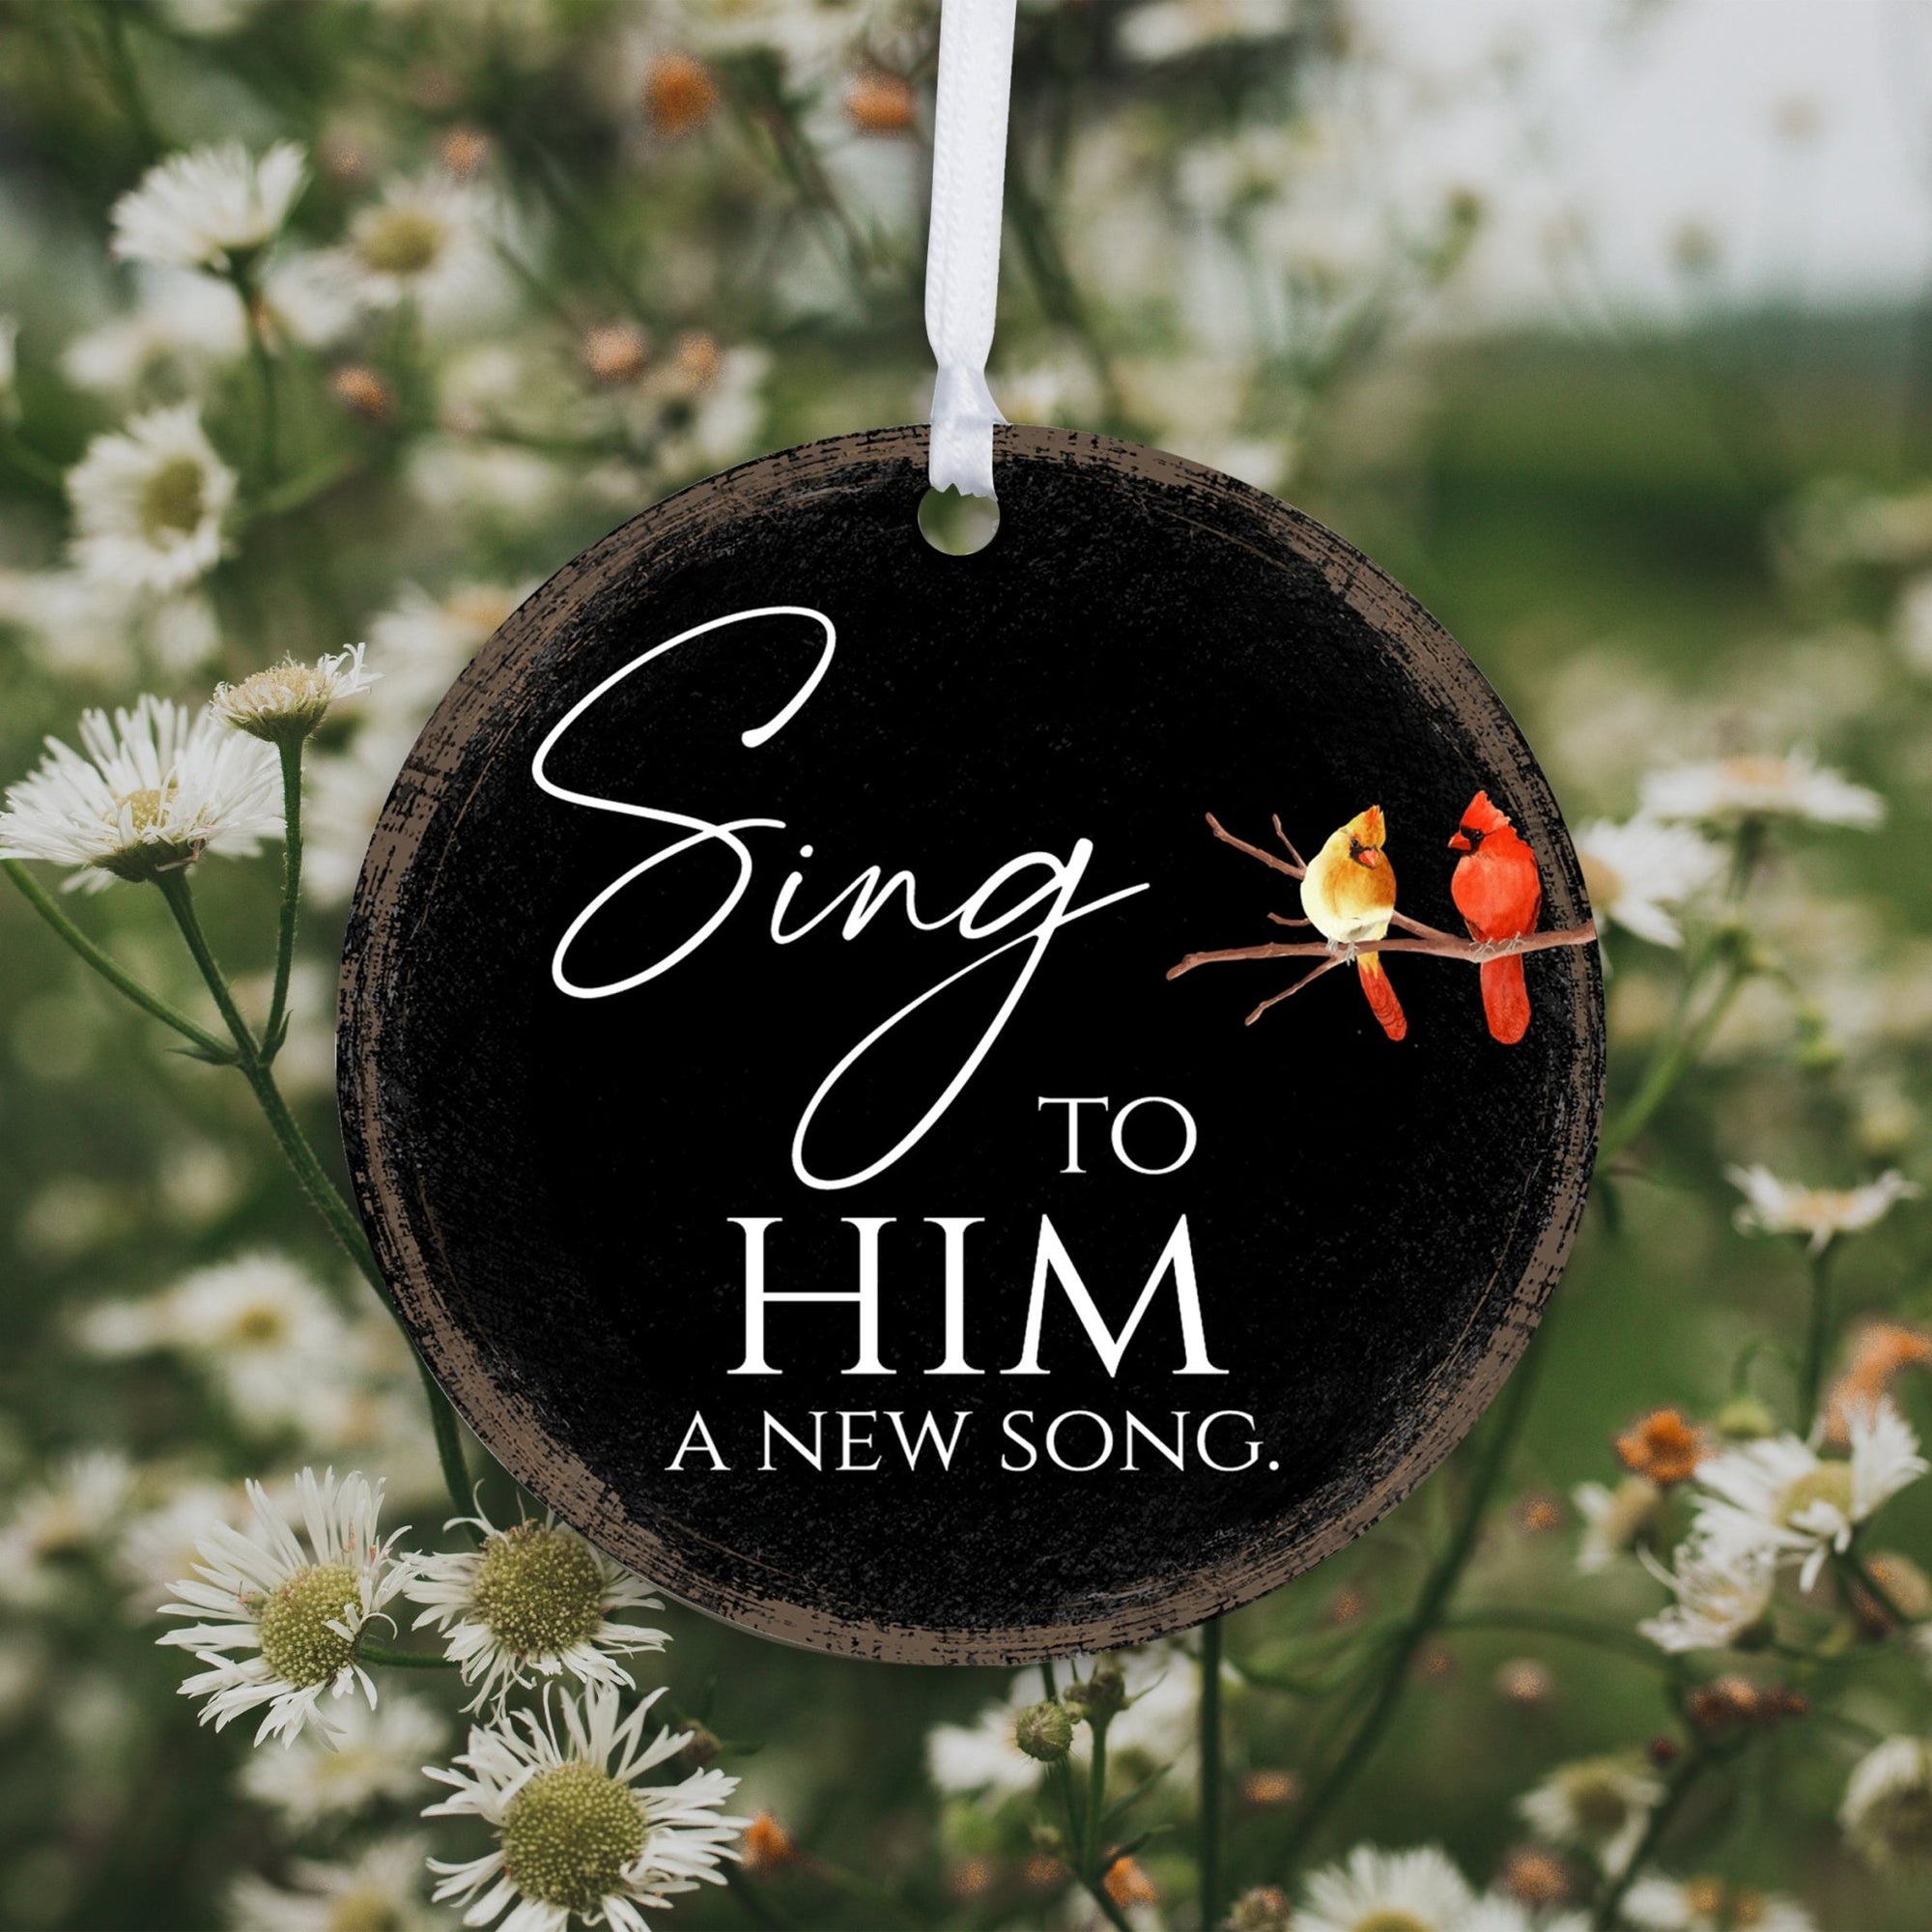 Vintage-Inspired Cardinal Ornament With Everyday Verses Gift Ideas - Sing To Him - LifeSong Milestones